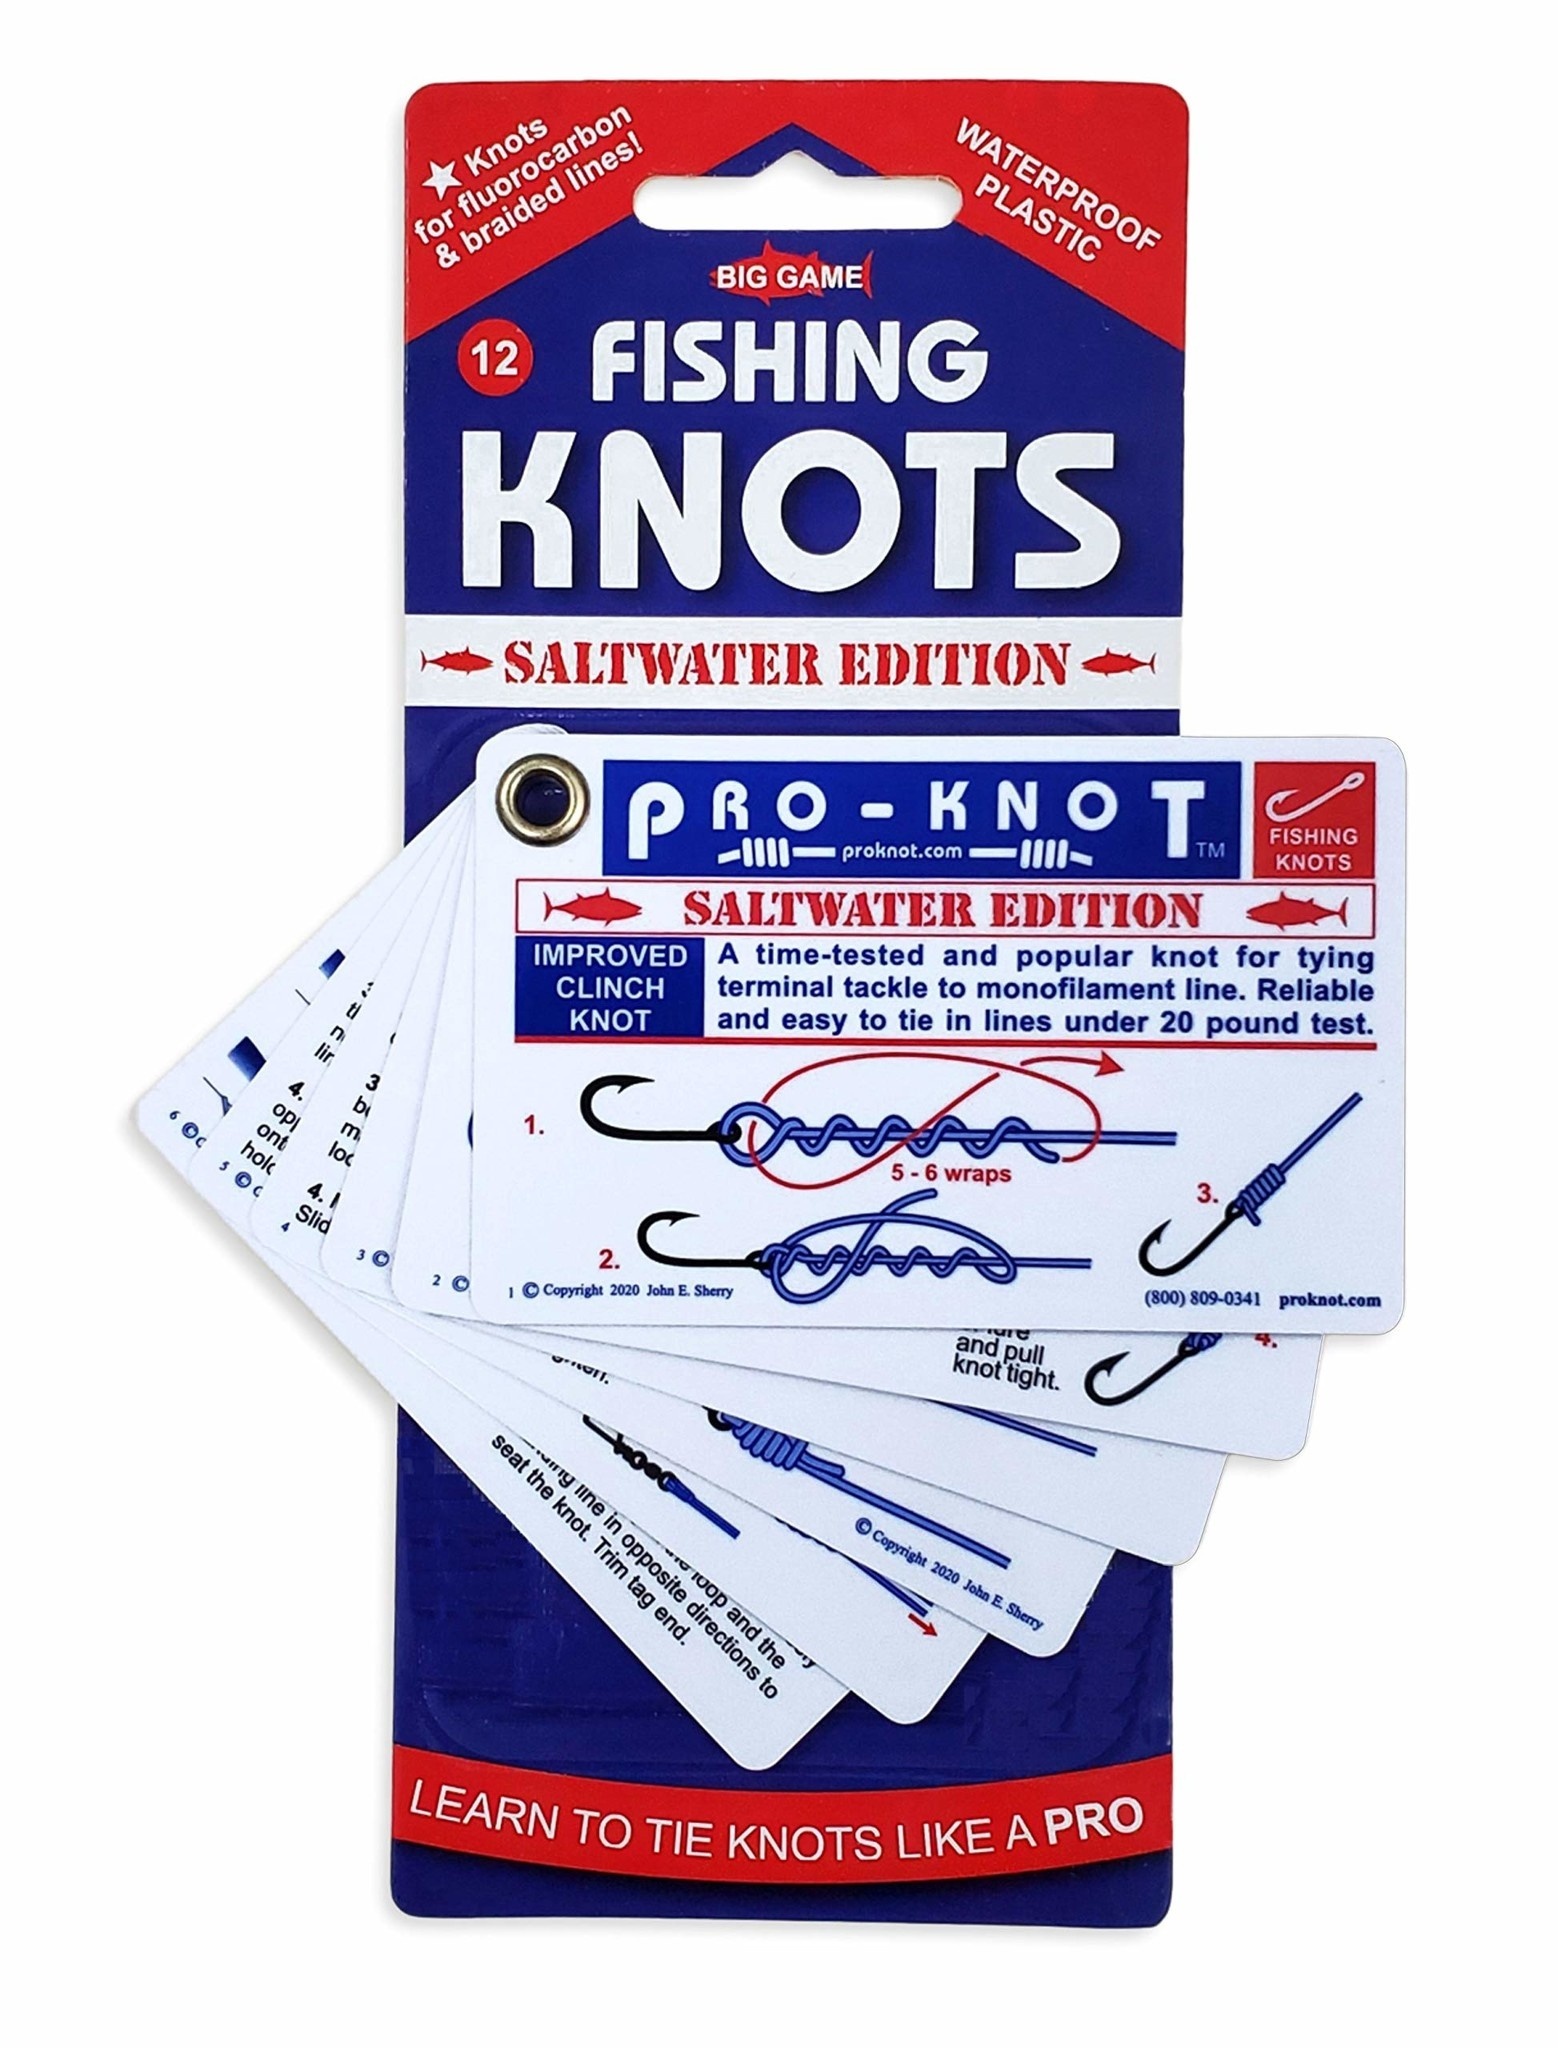 Fishing Knots Cards-Saltwater Edition